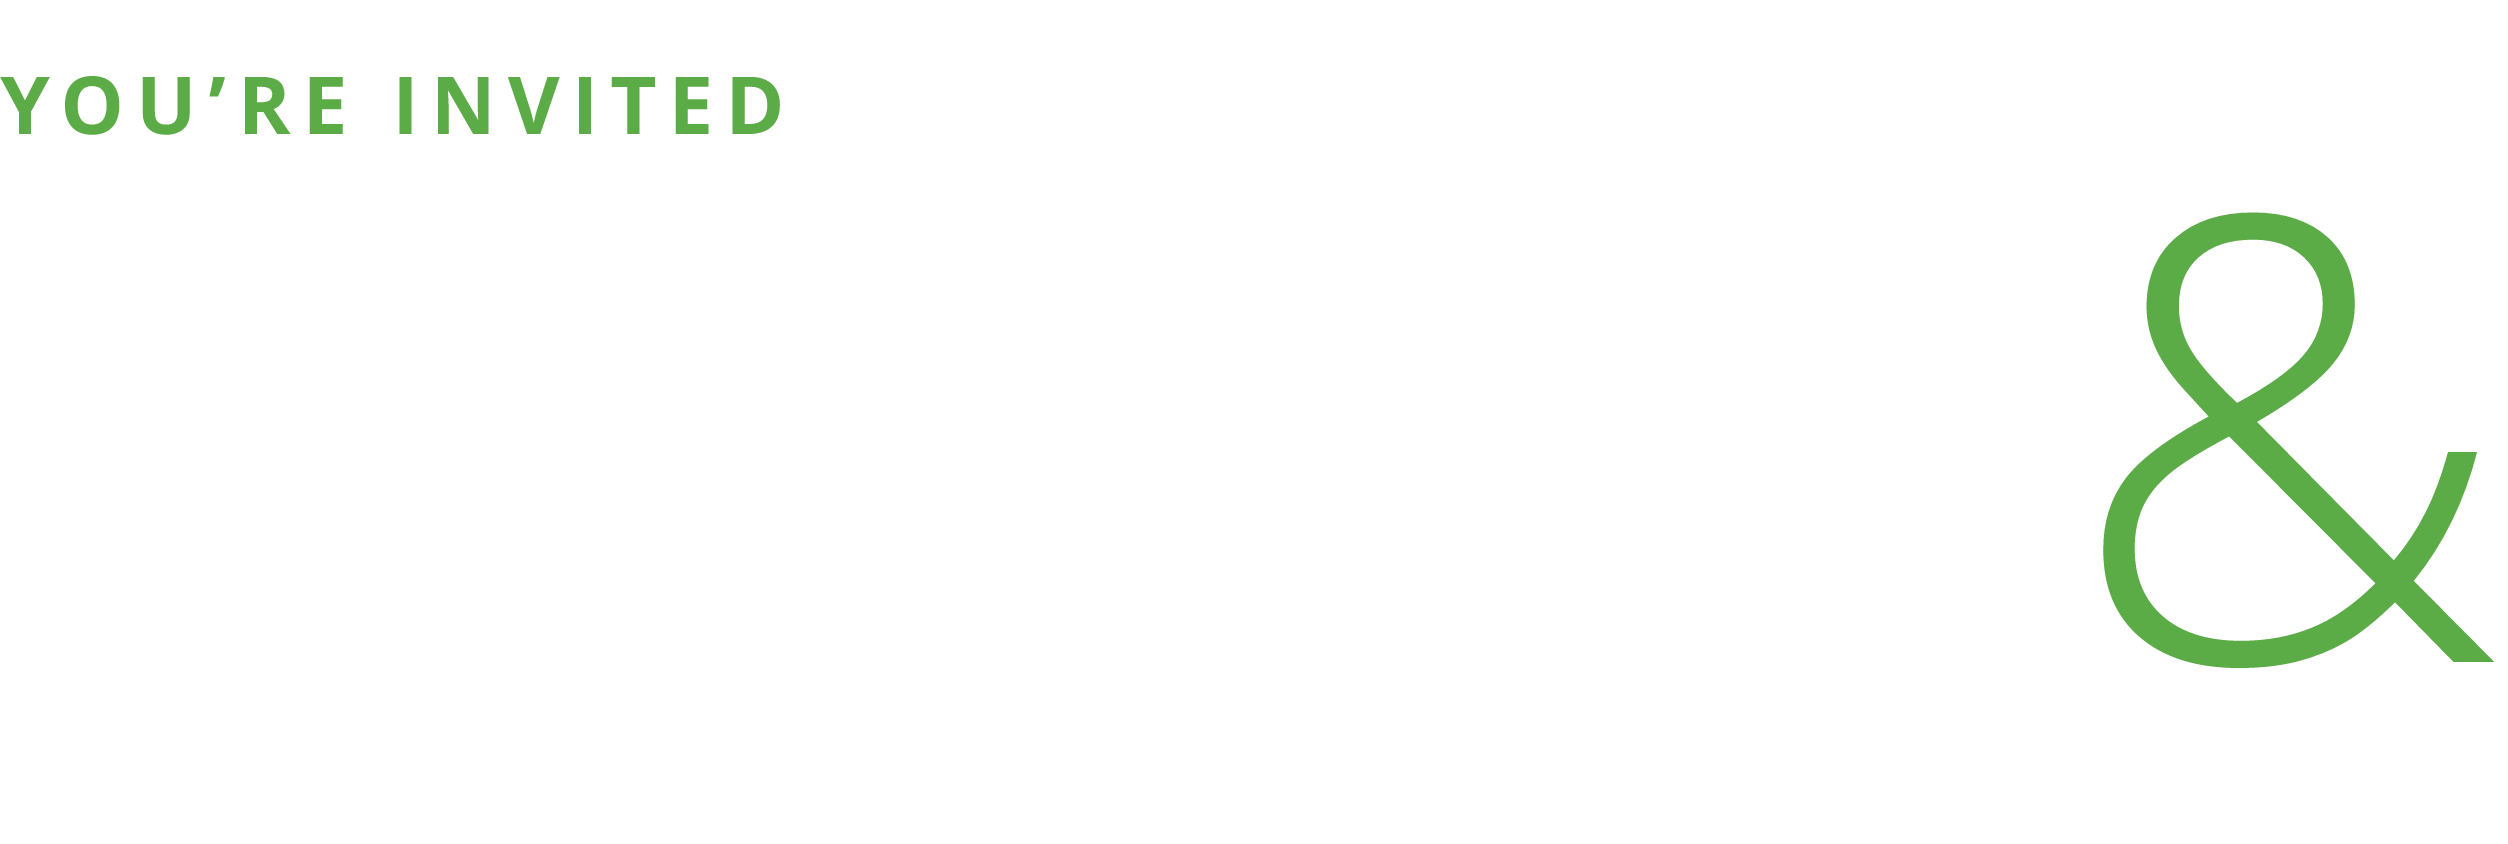 You're invite grand opening and community day